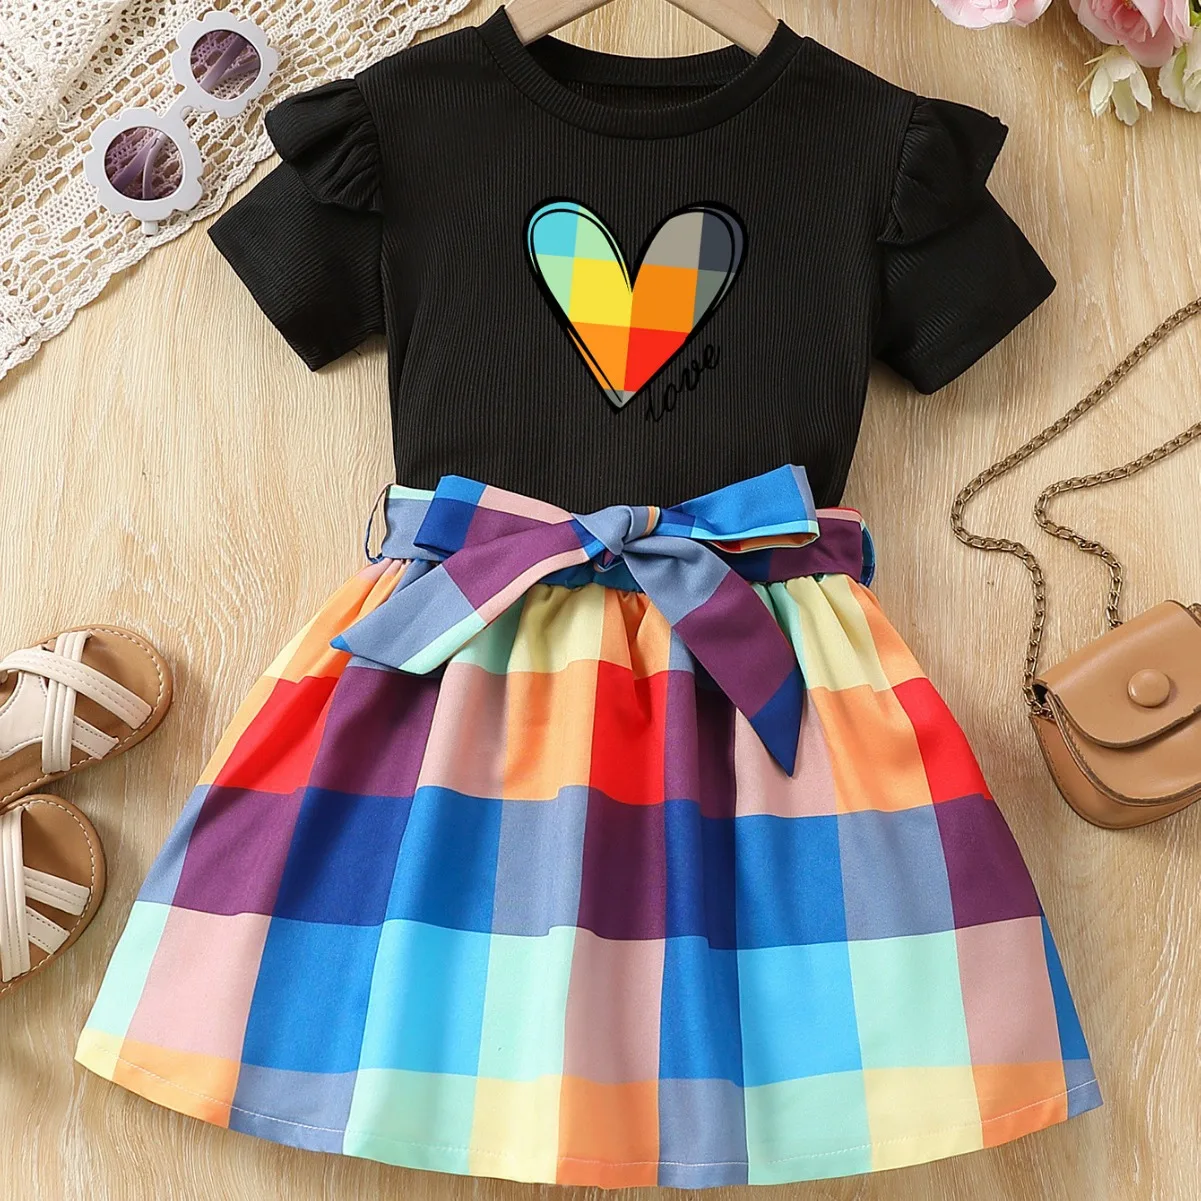 2024 Summer Kids Clothes Sets Girls Casual Cute Heart Print Short Sleeve T-shirt Top + Plaid Skirt Children's Two-piece Clothing girls clothing sets new summer short sleeve t shirt skirt 2pcs for kids clothing sets baby clothes outfits